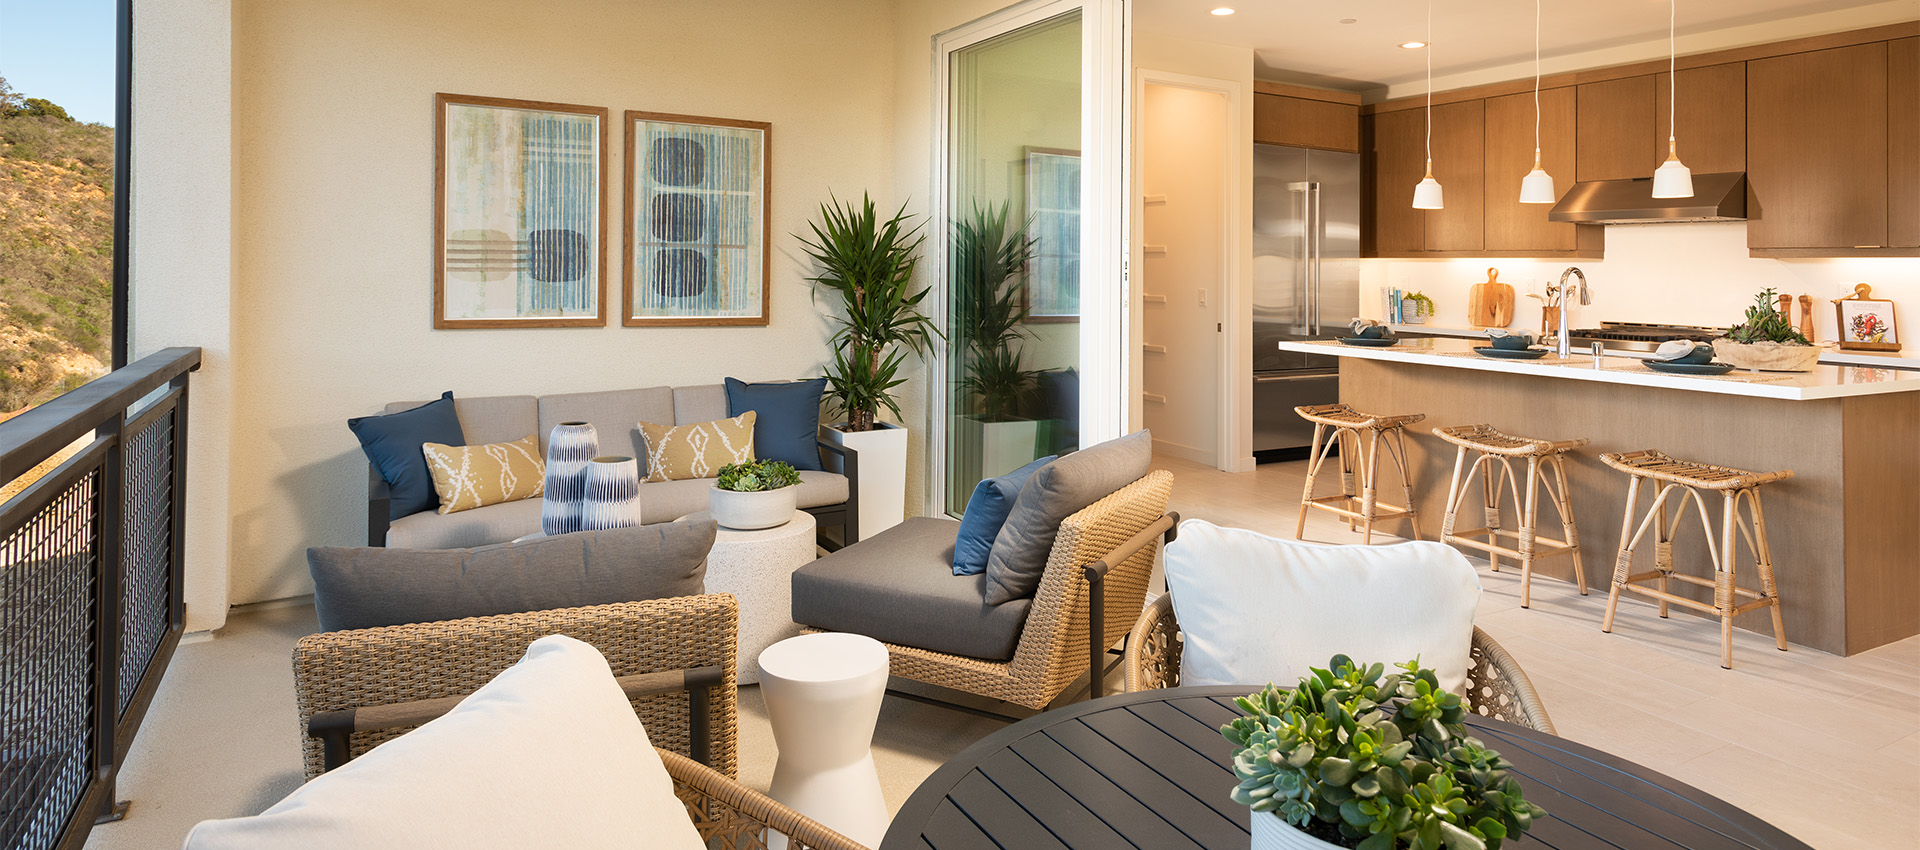 Image of the outdoor living space in Plan 3 at AERO